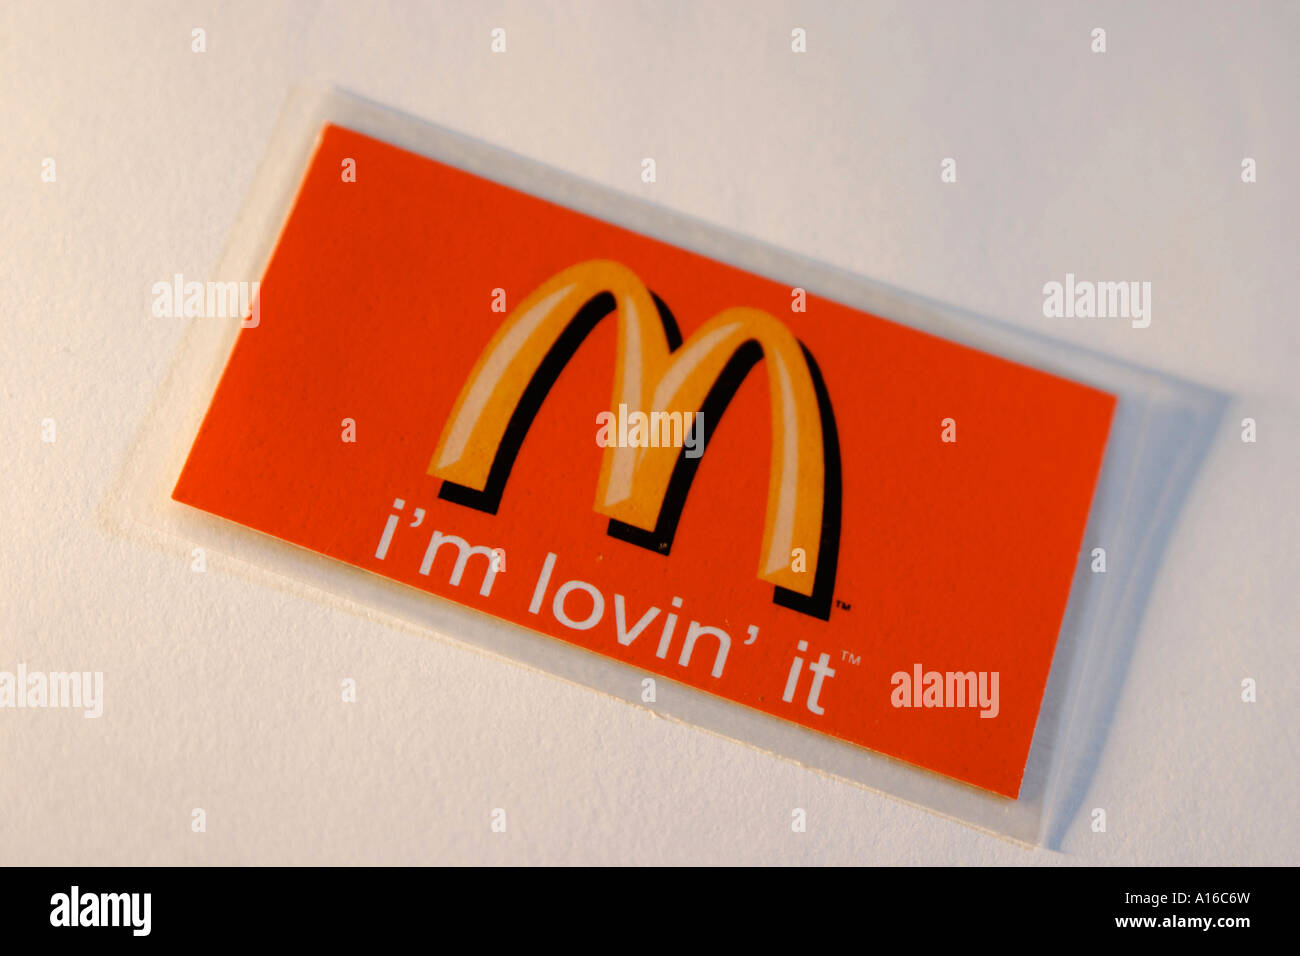 I M Lovin It Mcdonalds High Resolution Stock Photography And Images Alamy